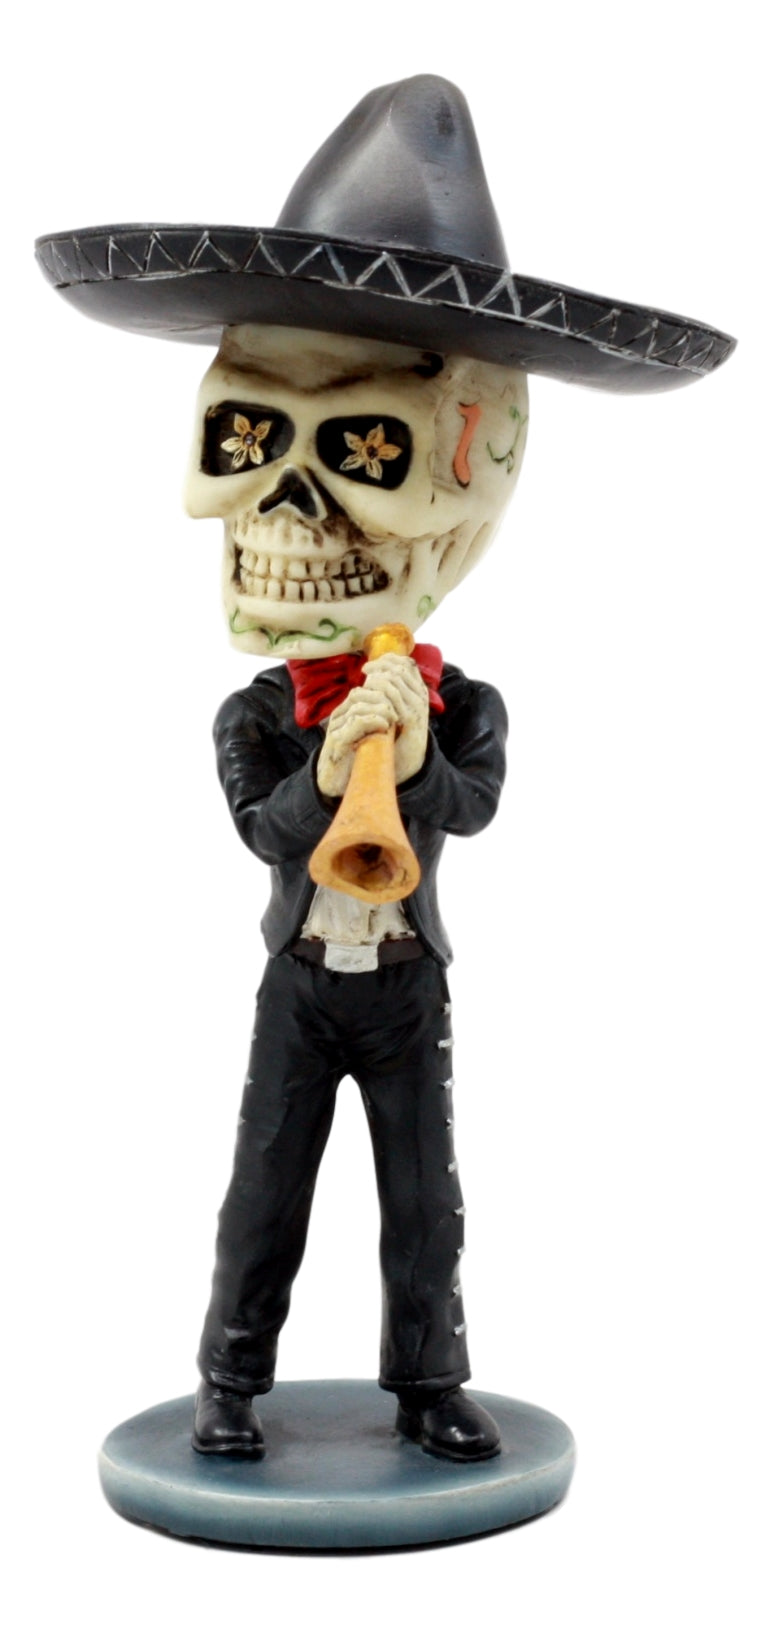 Ebros Day Of The Dead Skeleton Wedding Mariachi Trumpet Player Bobblehead Figurine Traditional Folklore Mexican Musician Sculpture